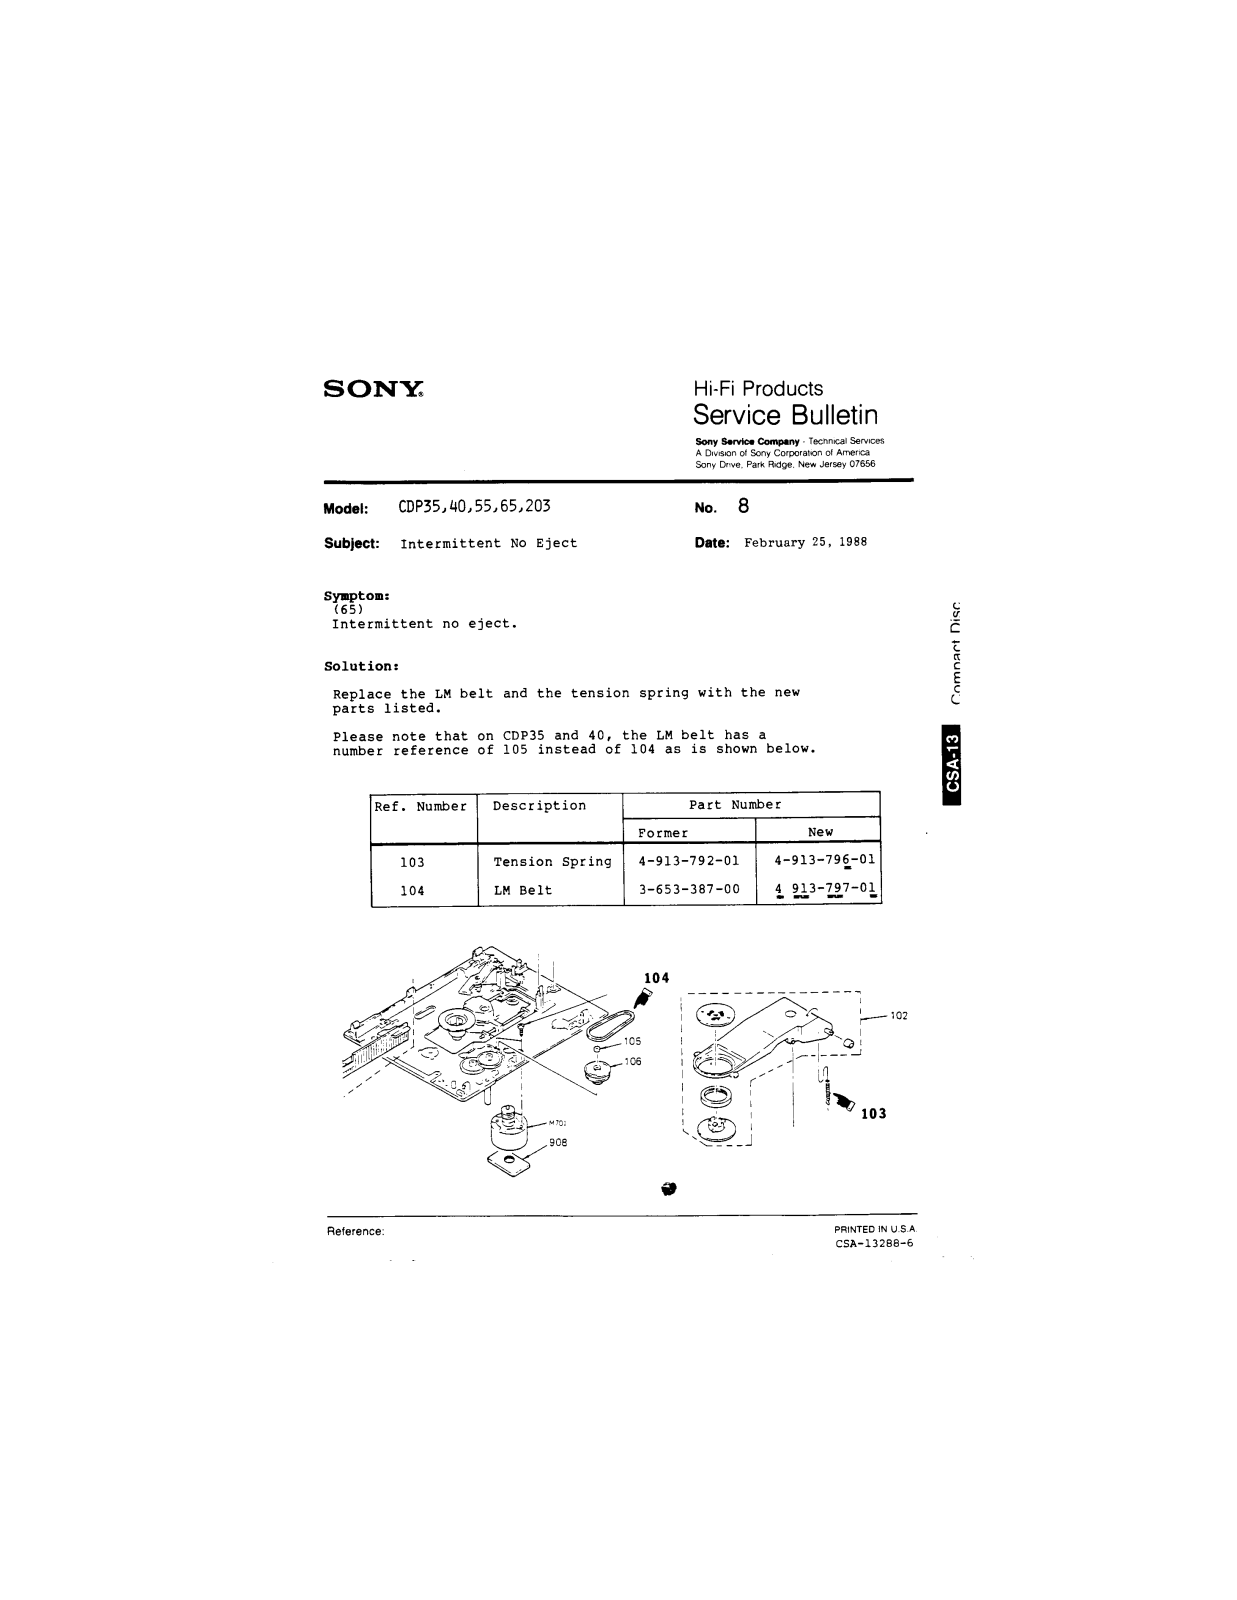 SONY EXCD-40 Service Bulletin